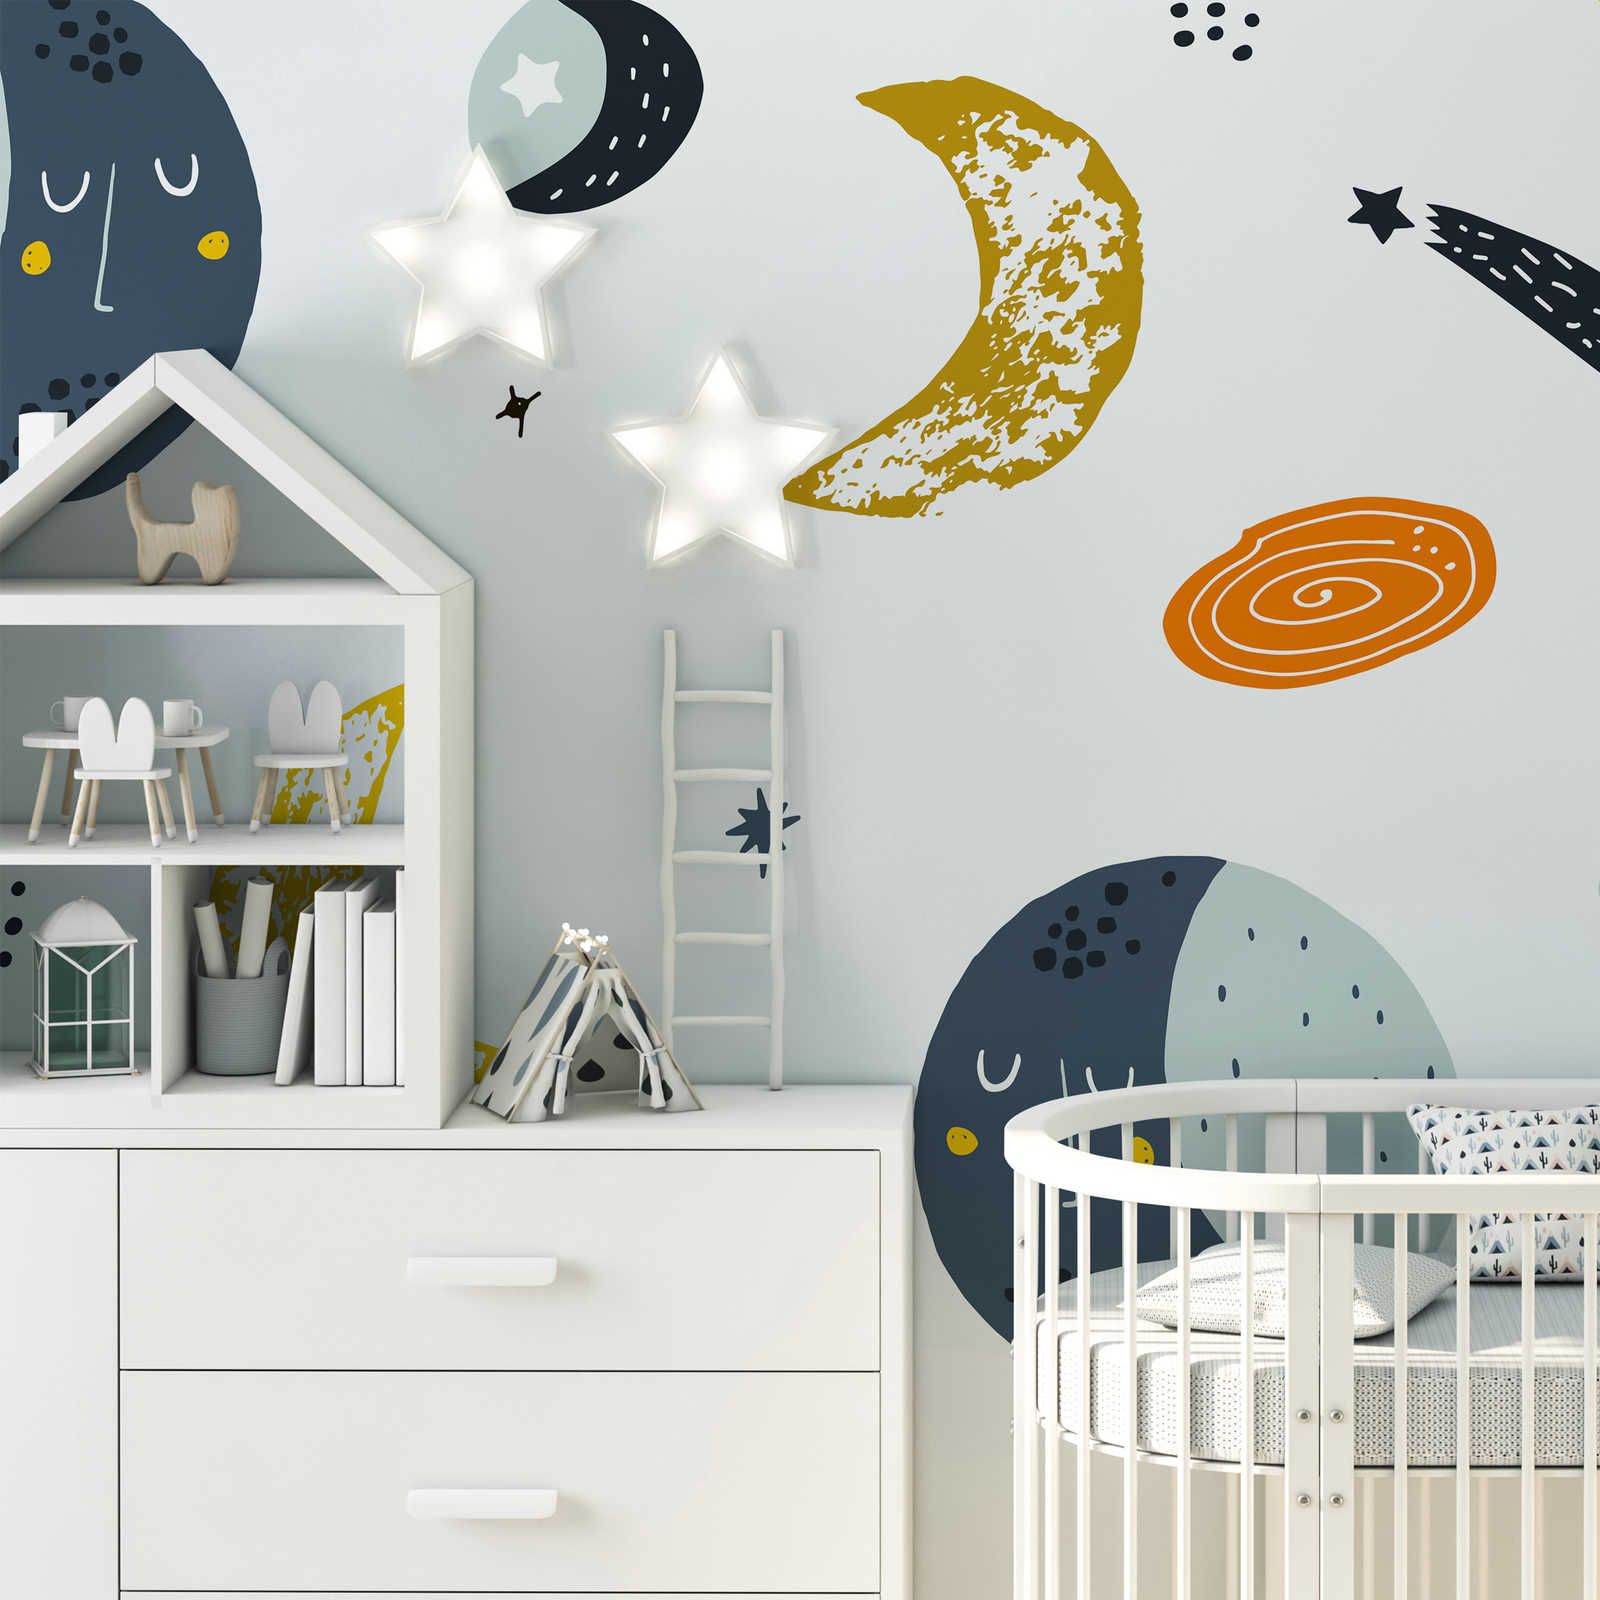         Photo wallpaper with moons and shooting stars - Smooth & slightly shiny non-woven
    